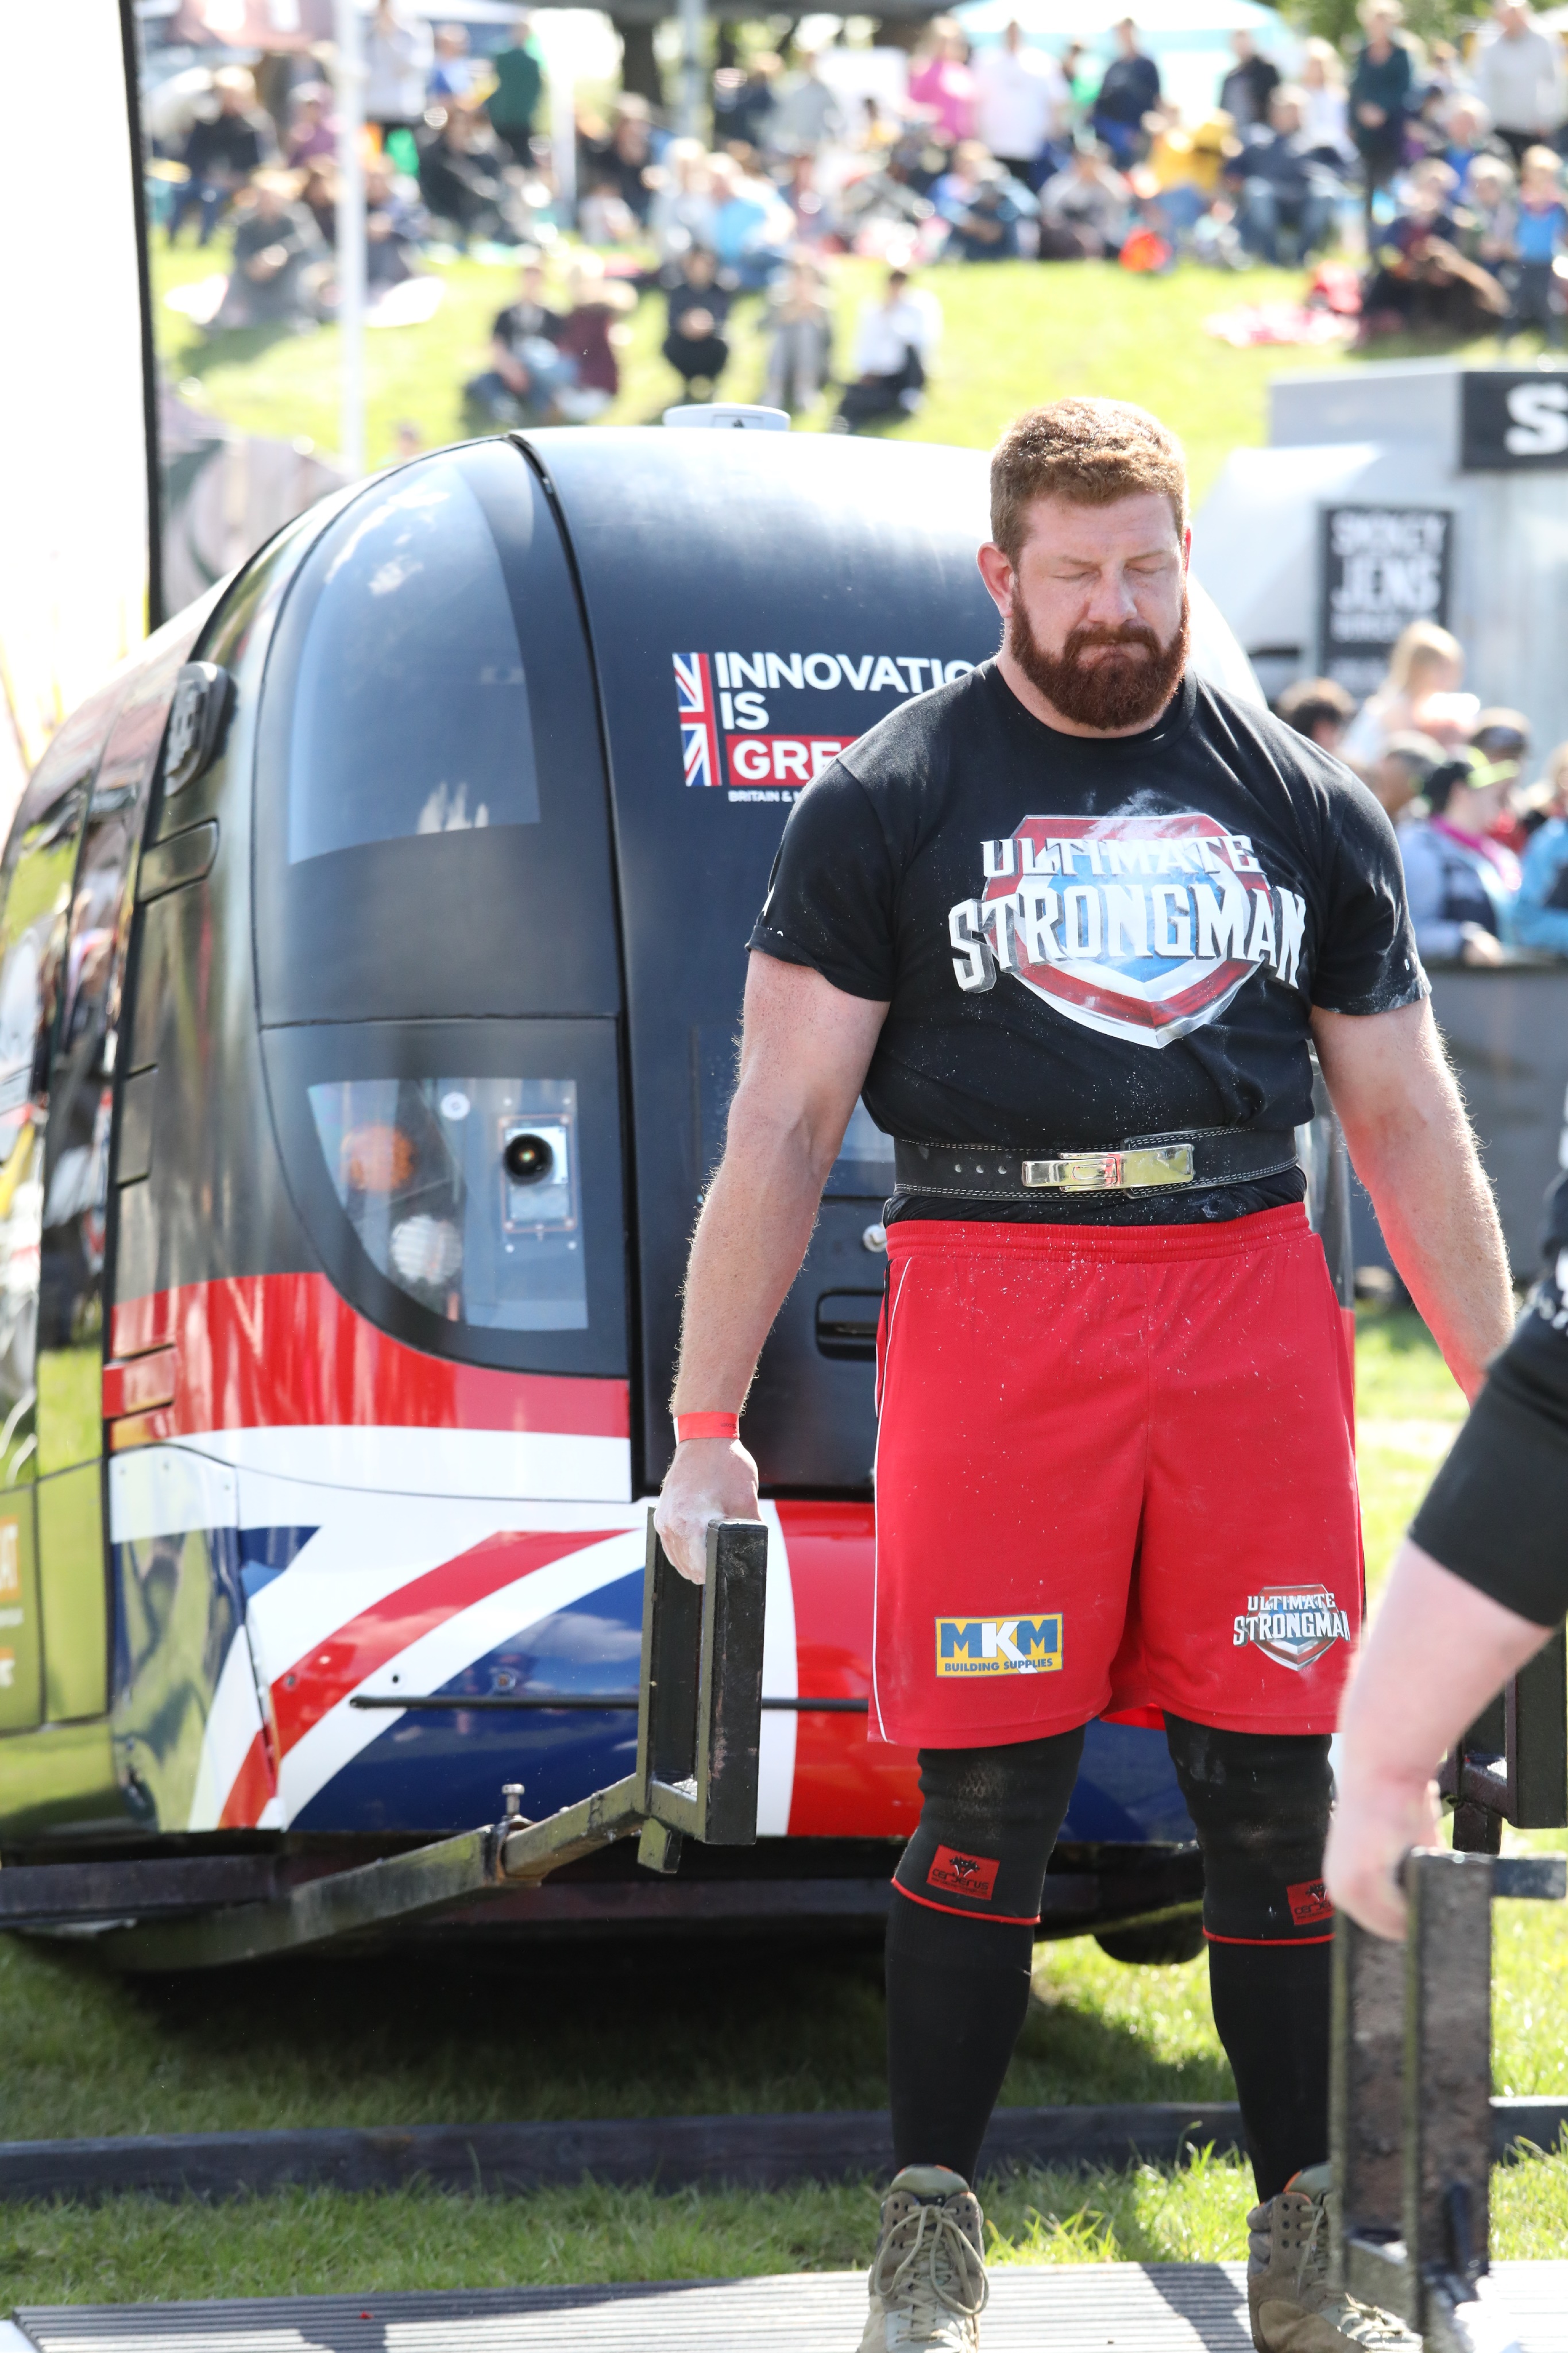 Ultimate Strongman » Wales’s Strongest Man 2019 Photo Gallery